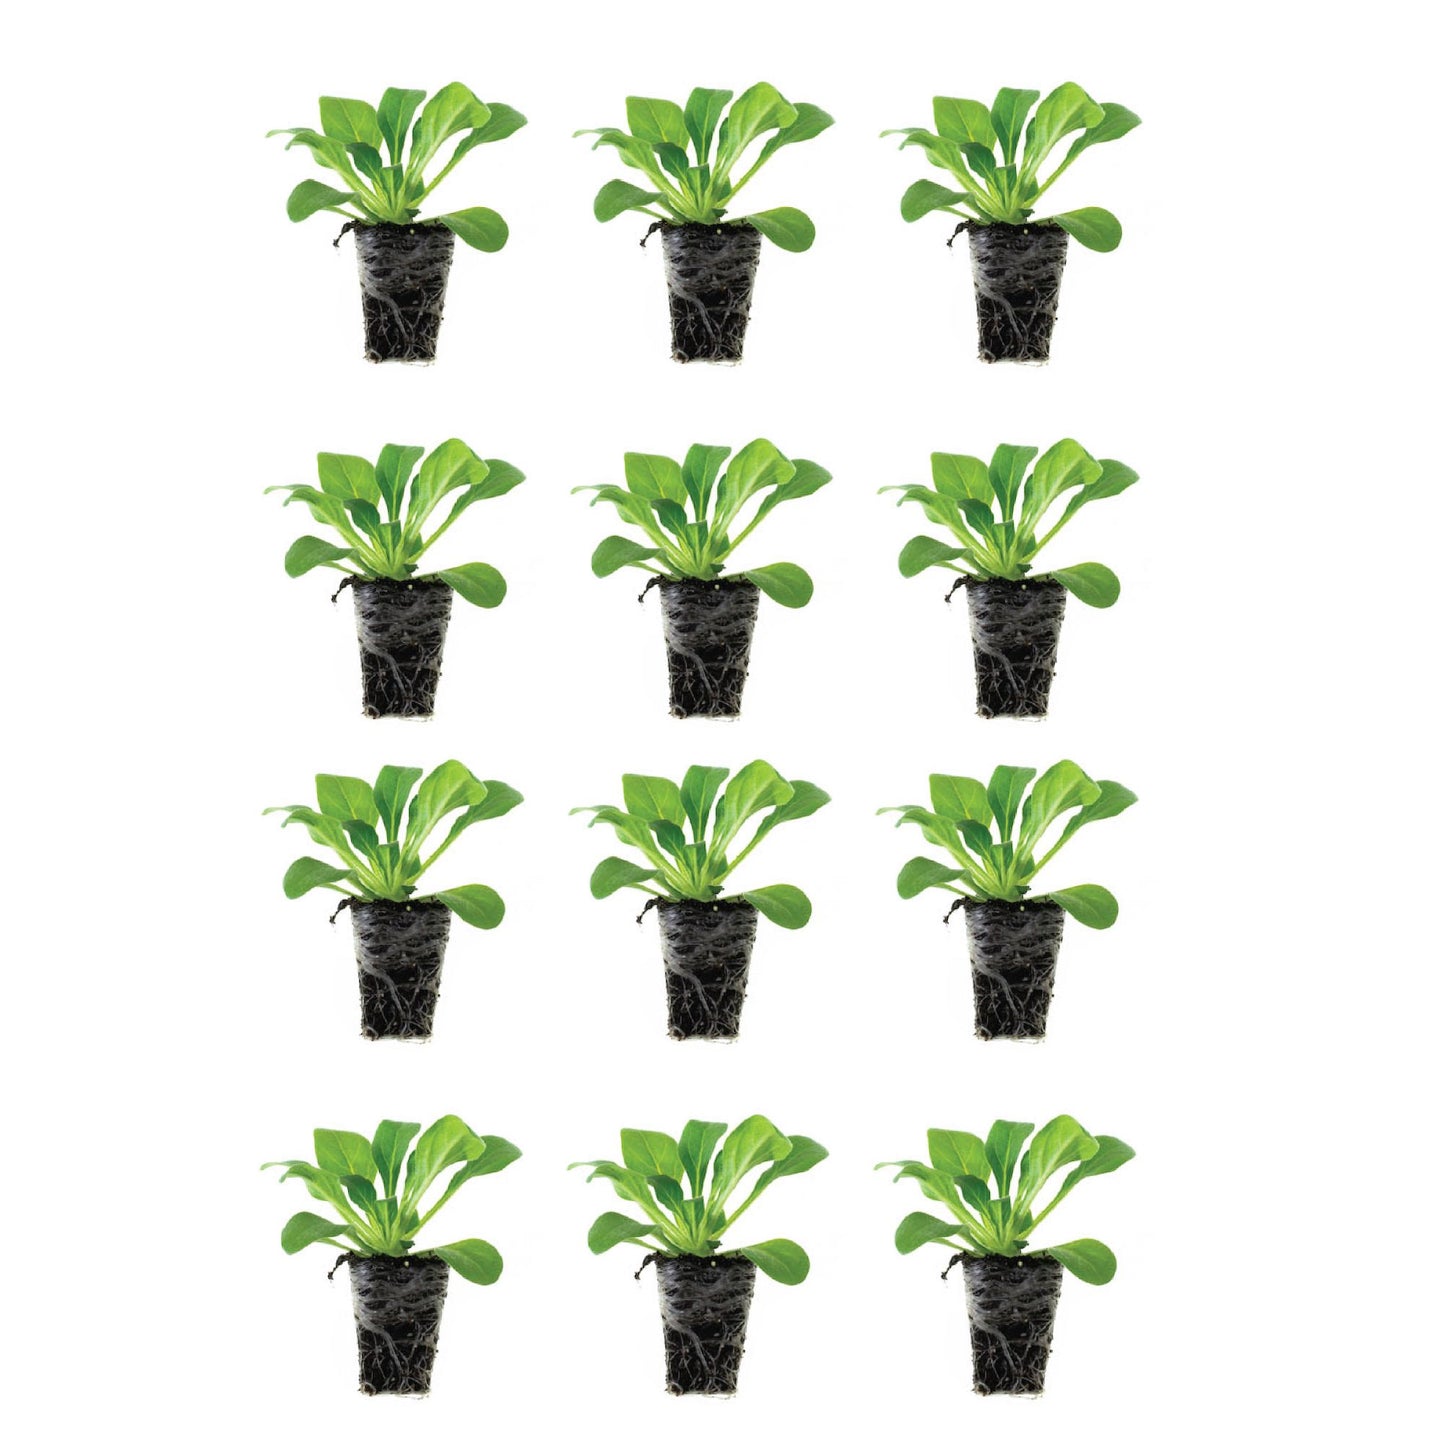 Petunia E3 Easy Wave® Peppermint Mix Plantlings Kit Live Baby Plants 1-3in., 12-Pack